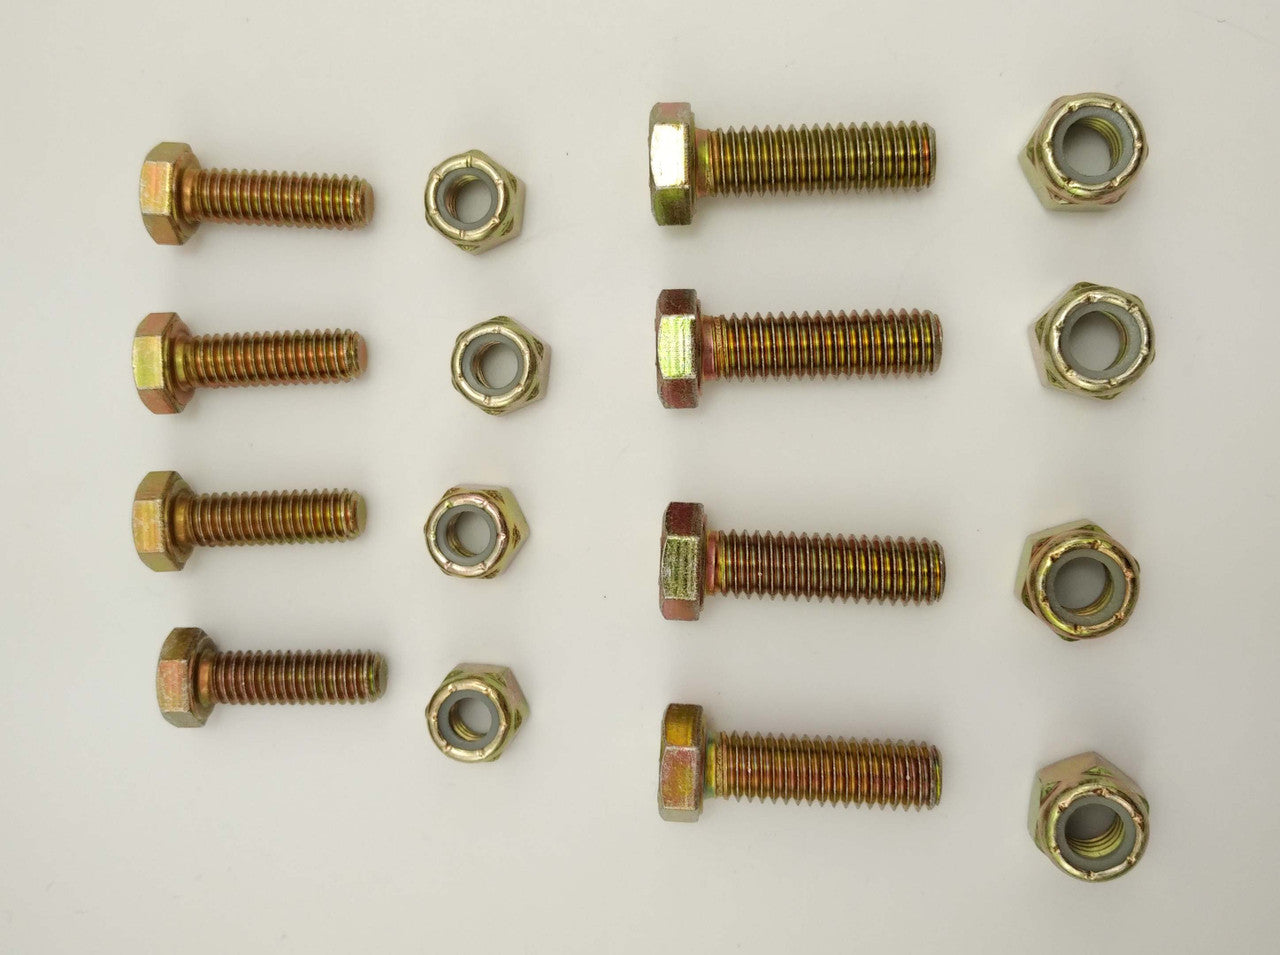 Mounting and Bracket Bolts and Nuts for eXmark Radius 60" or 52" Ultra Cut striping kits